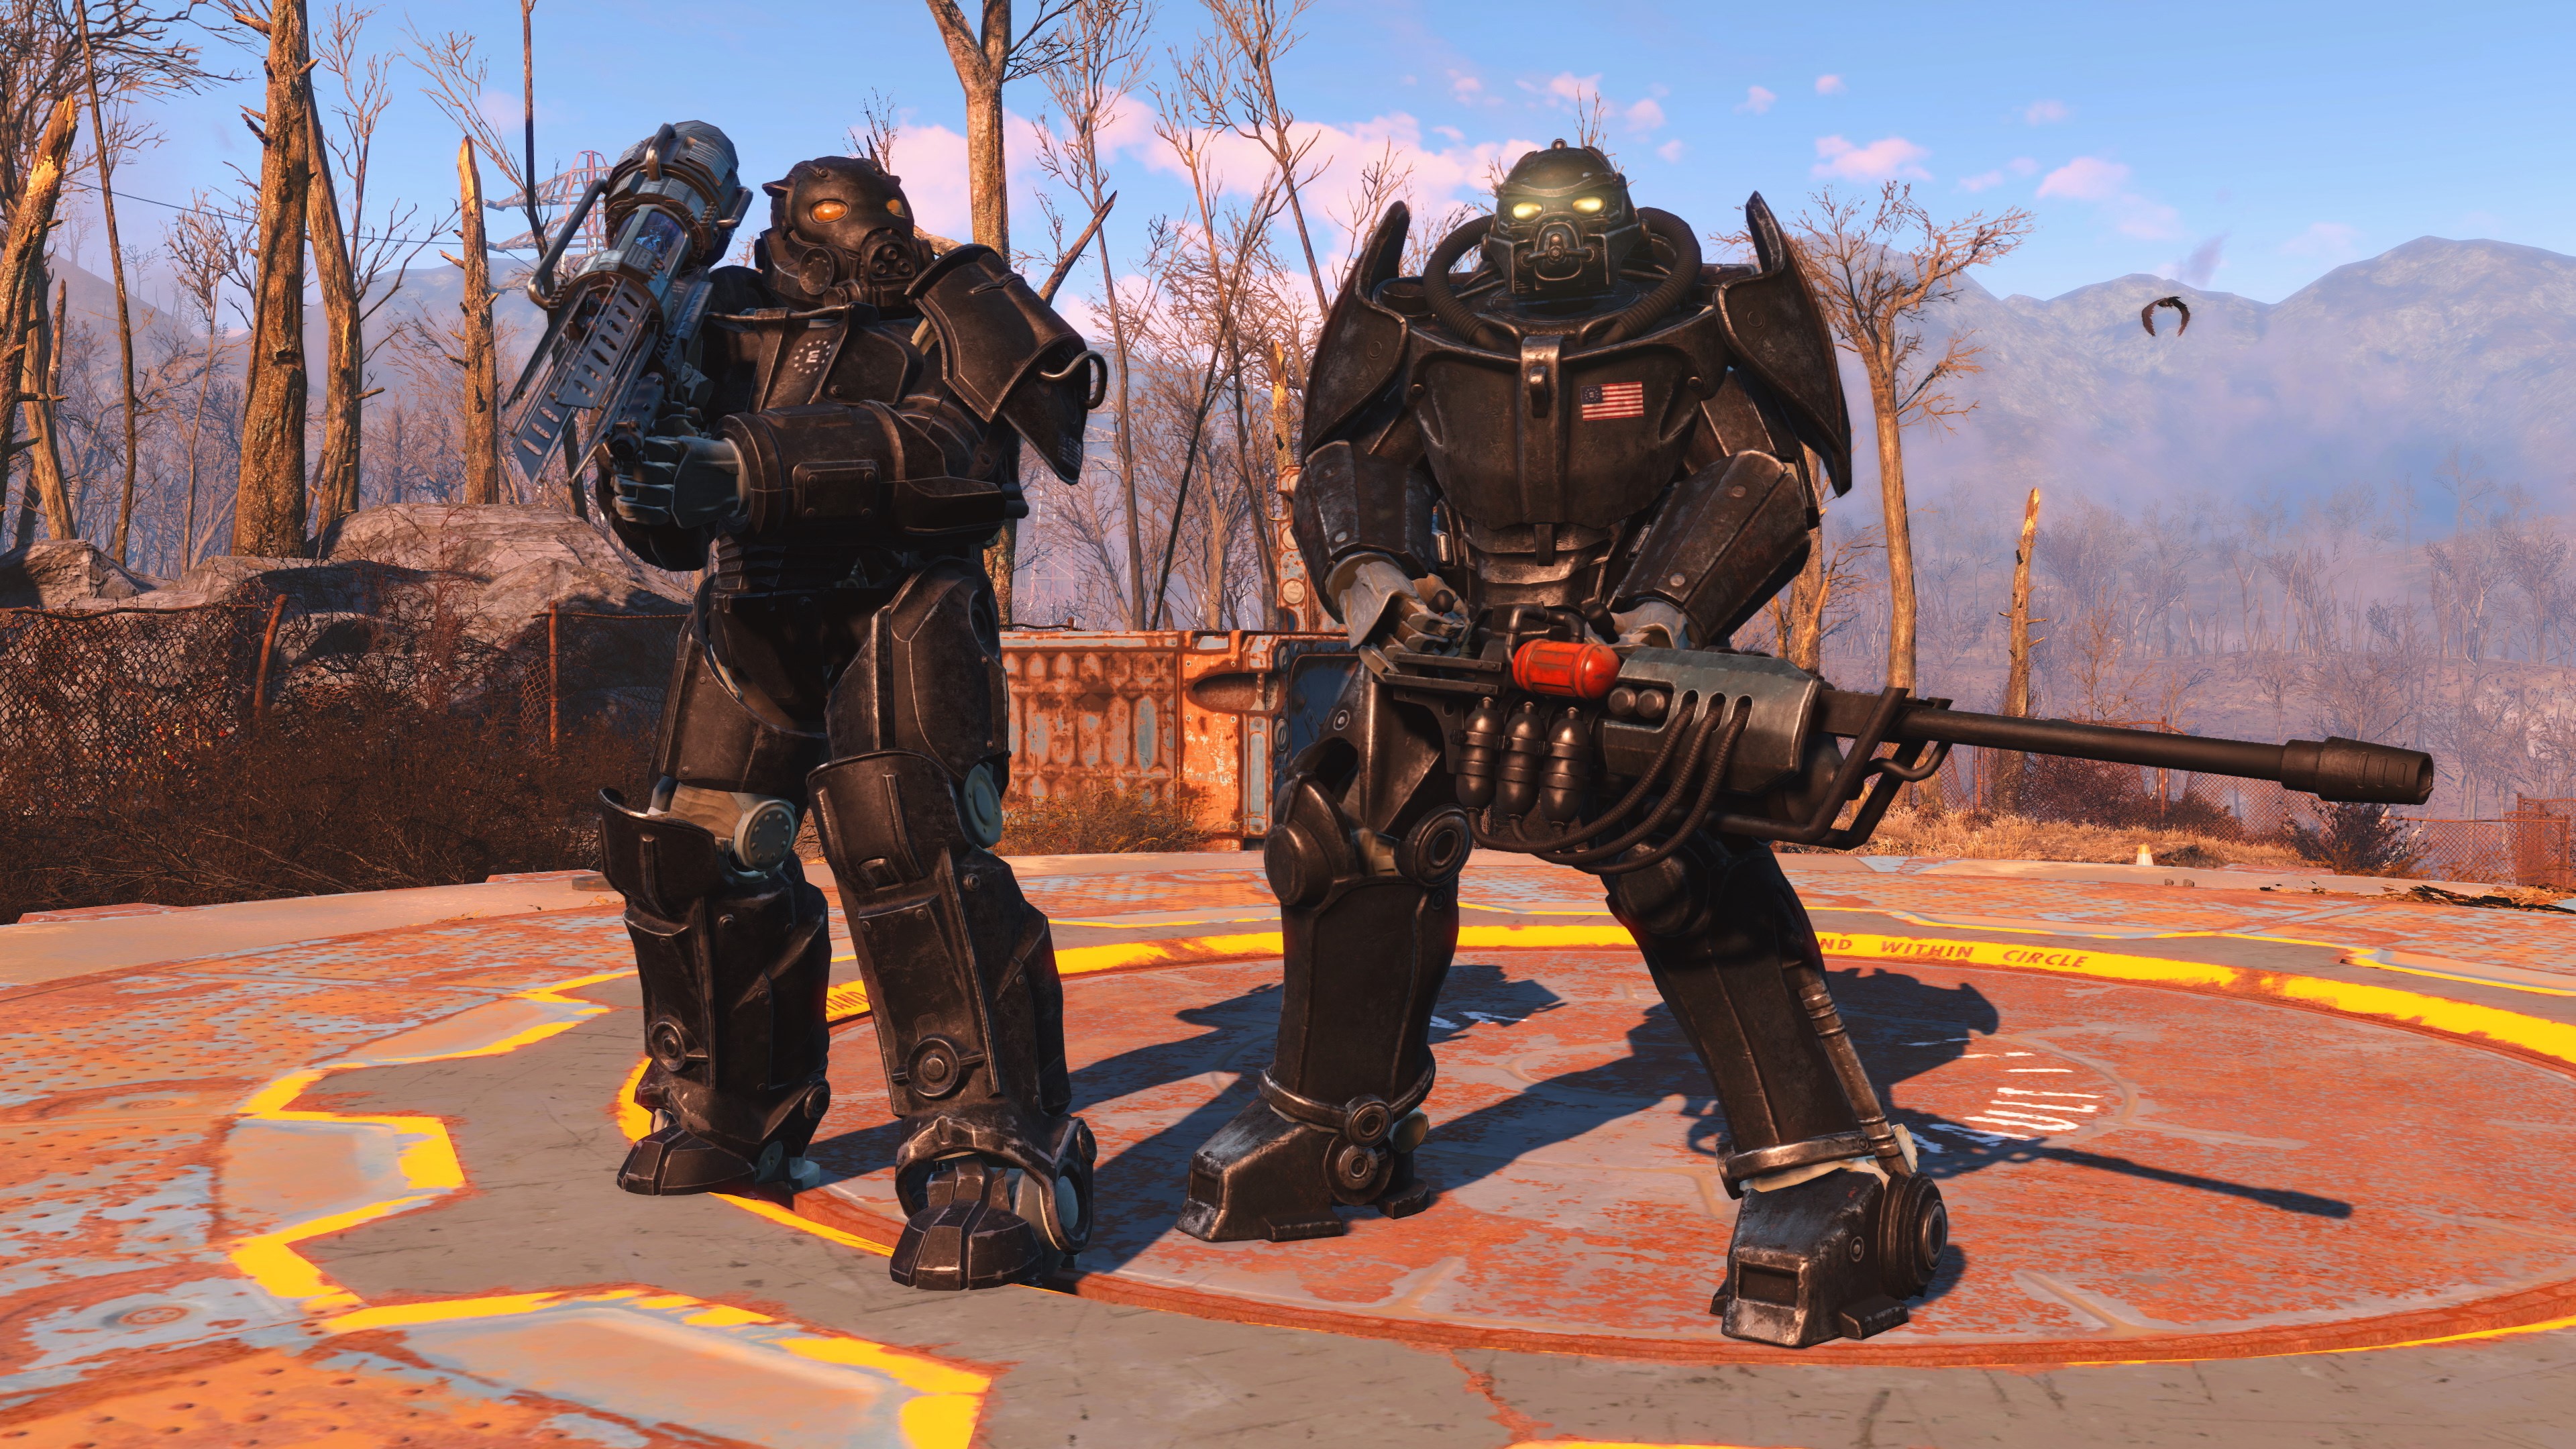 Two characters in power armor in Fallout 4.